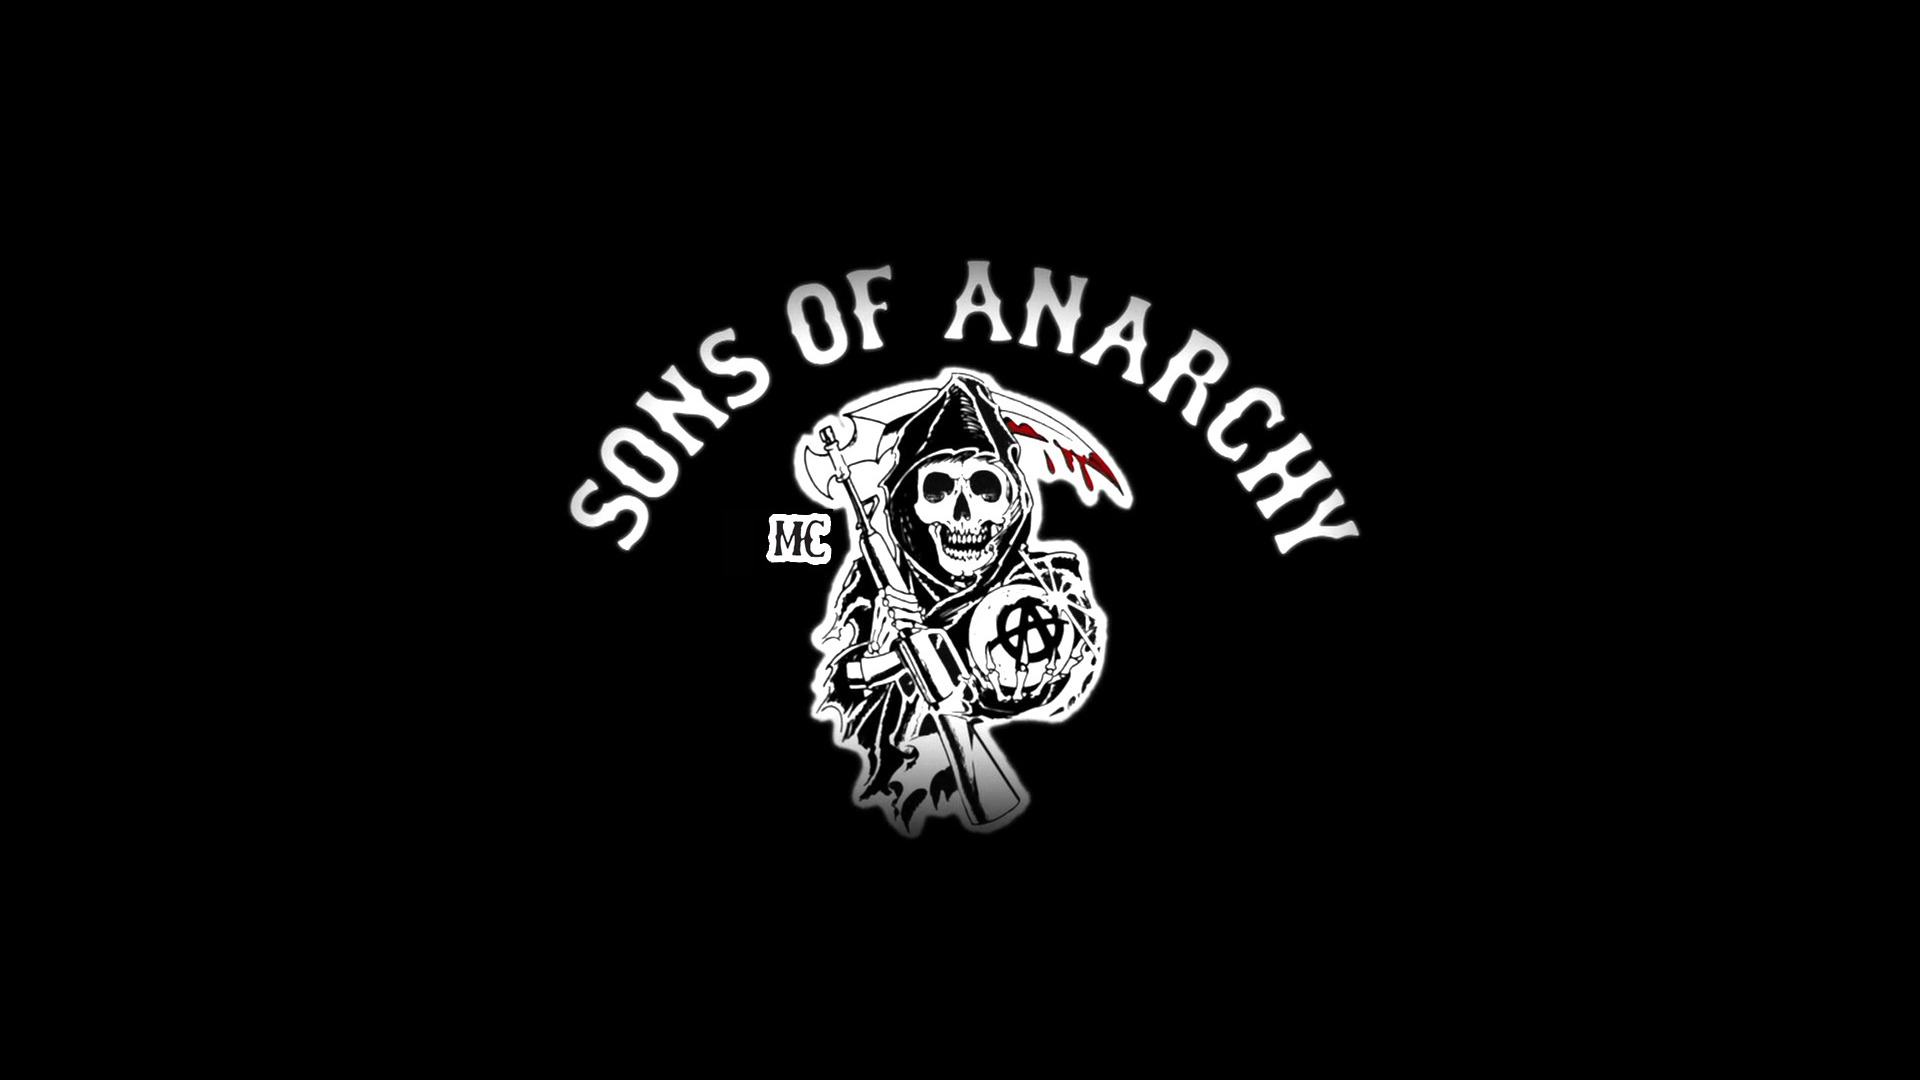  Sons Of Anarchy HQ Background Images